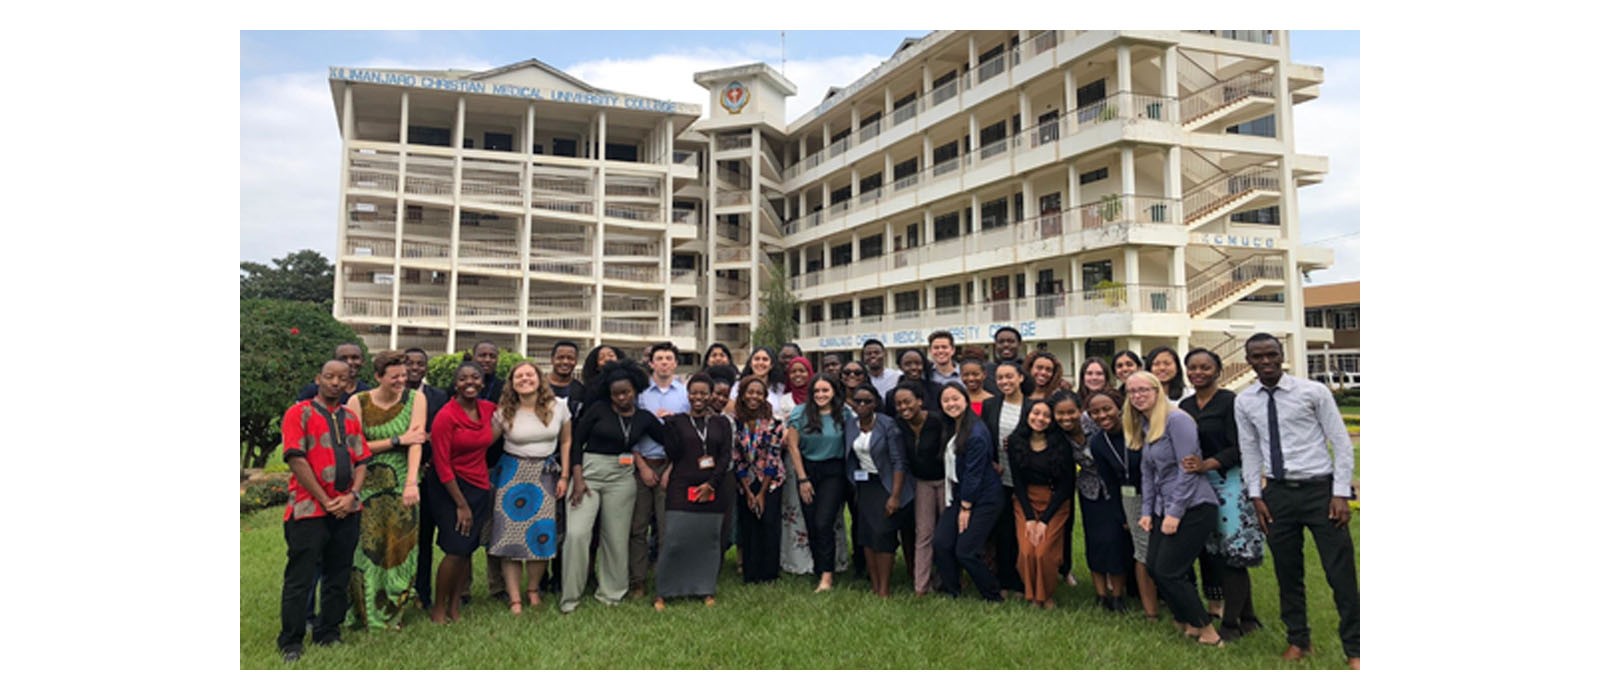 Global Health students participating in the KCMU-Co collaboration in 2019, the last time the program was in-person.